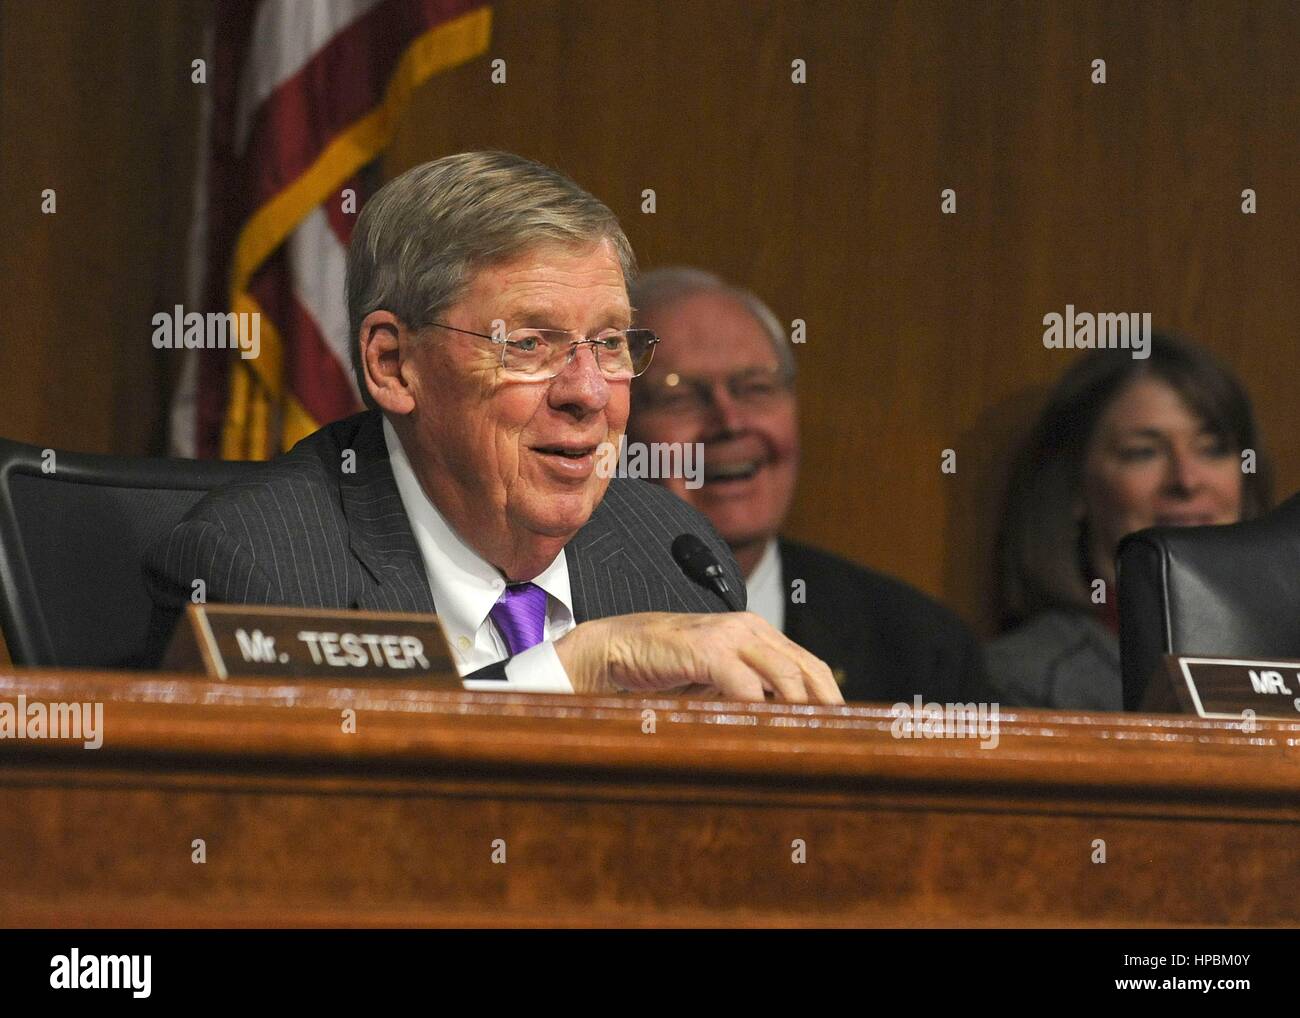 U.S. Senator Johnny Isakson, of Georgia asks a question of Dr. David Shulkin during confirmation hearings in the Senate Veterans Affairs Committee February 1, 2017 in Washington, DC. Shulkin was confirmed as the new head of the Veterans Affairs administration by a unanimous vote. Stock Photo